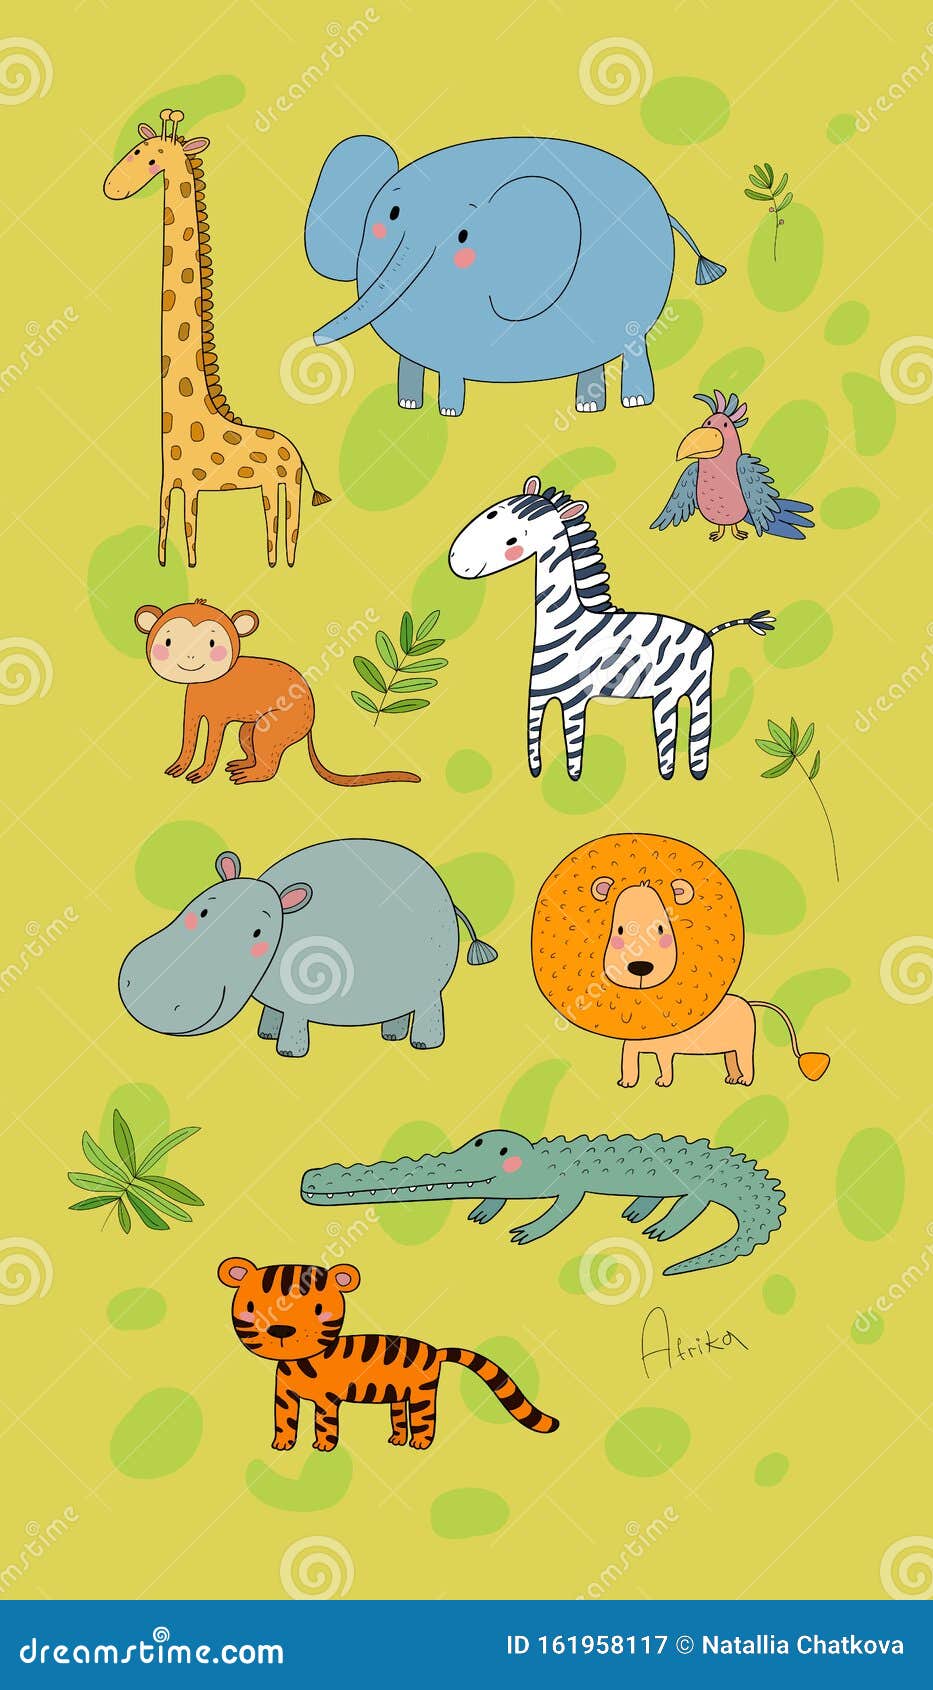 African Animals. Cute Cartoon Lion and Tiger, Elephant and Zebra, Monkey  and Parrot Stock Vector - Illustration of american, jungle: 161958117